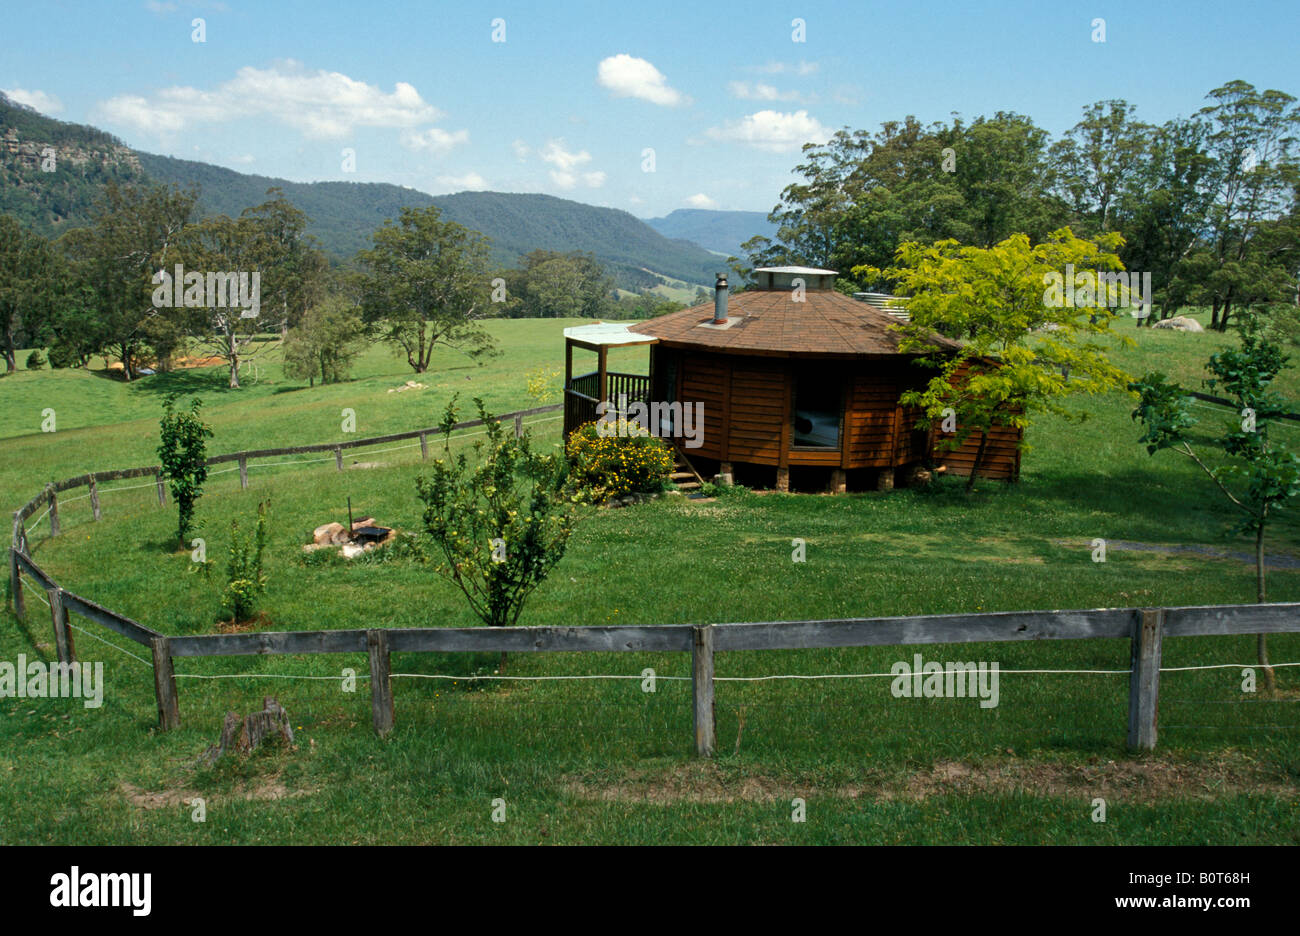 Farm Stay Accomodation Les Cèdres Kangaroo Valley New South Wales Australie Banque D'Images